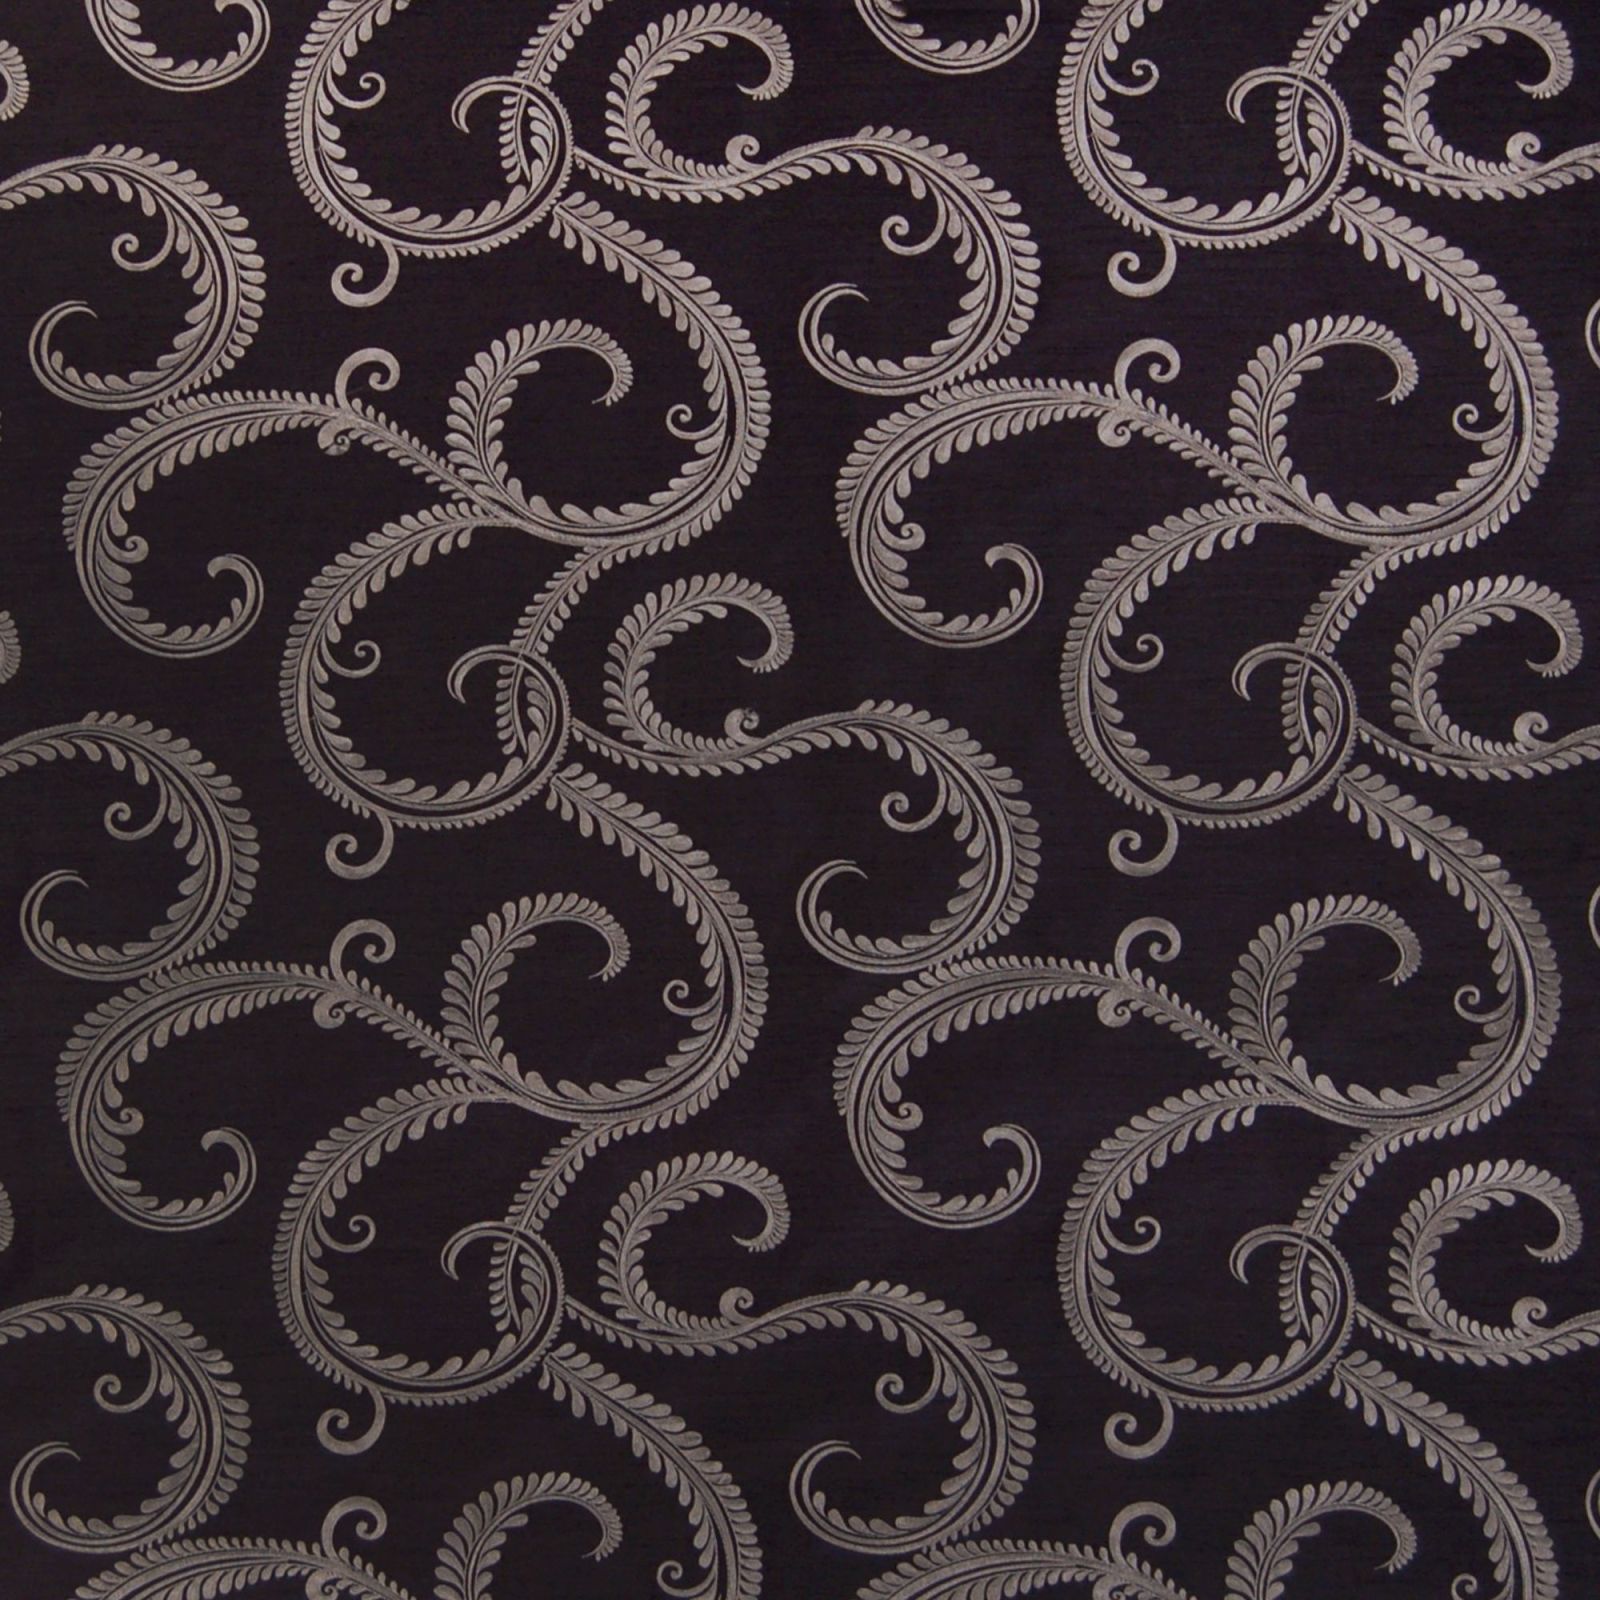 Onyx Black Contemporary Embroidery Upholstery Fabric